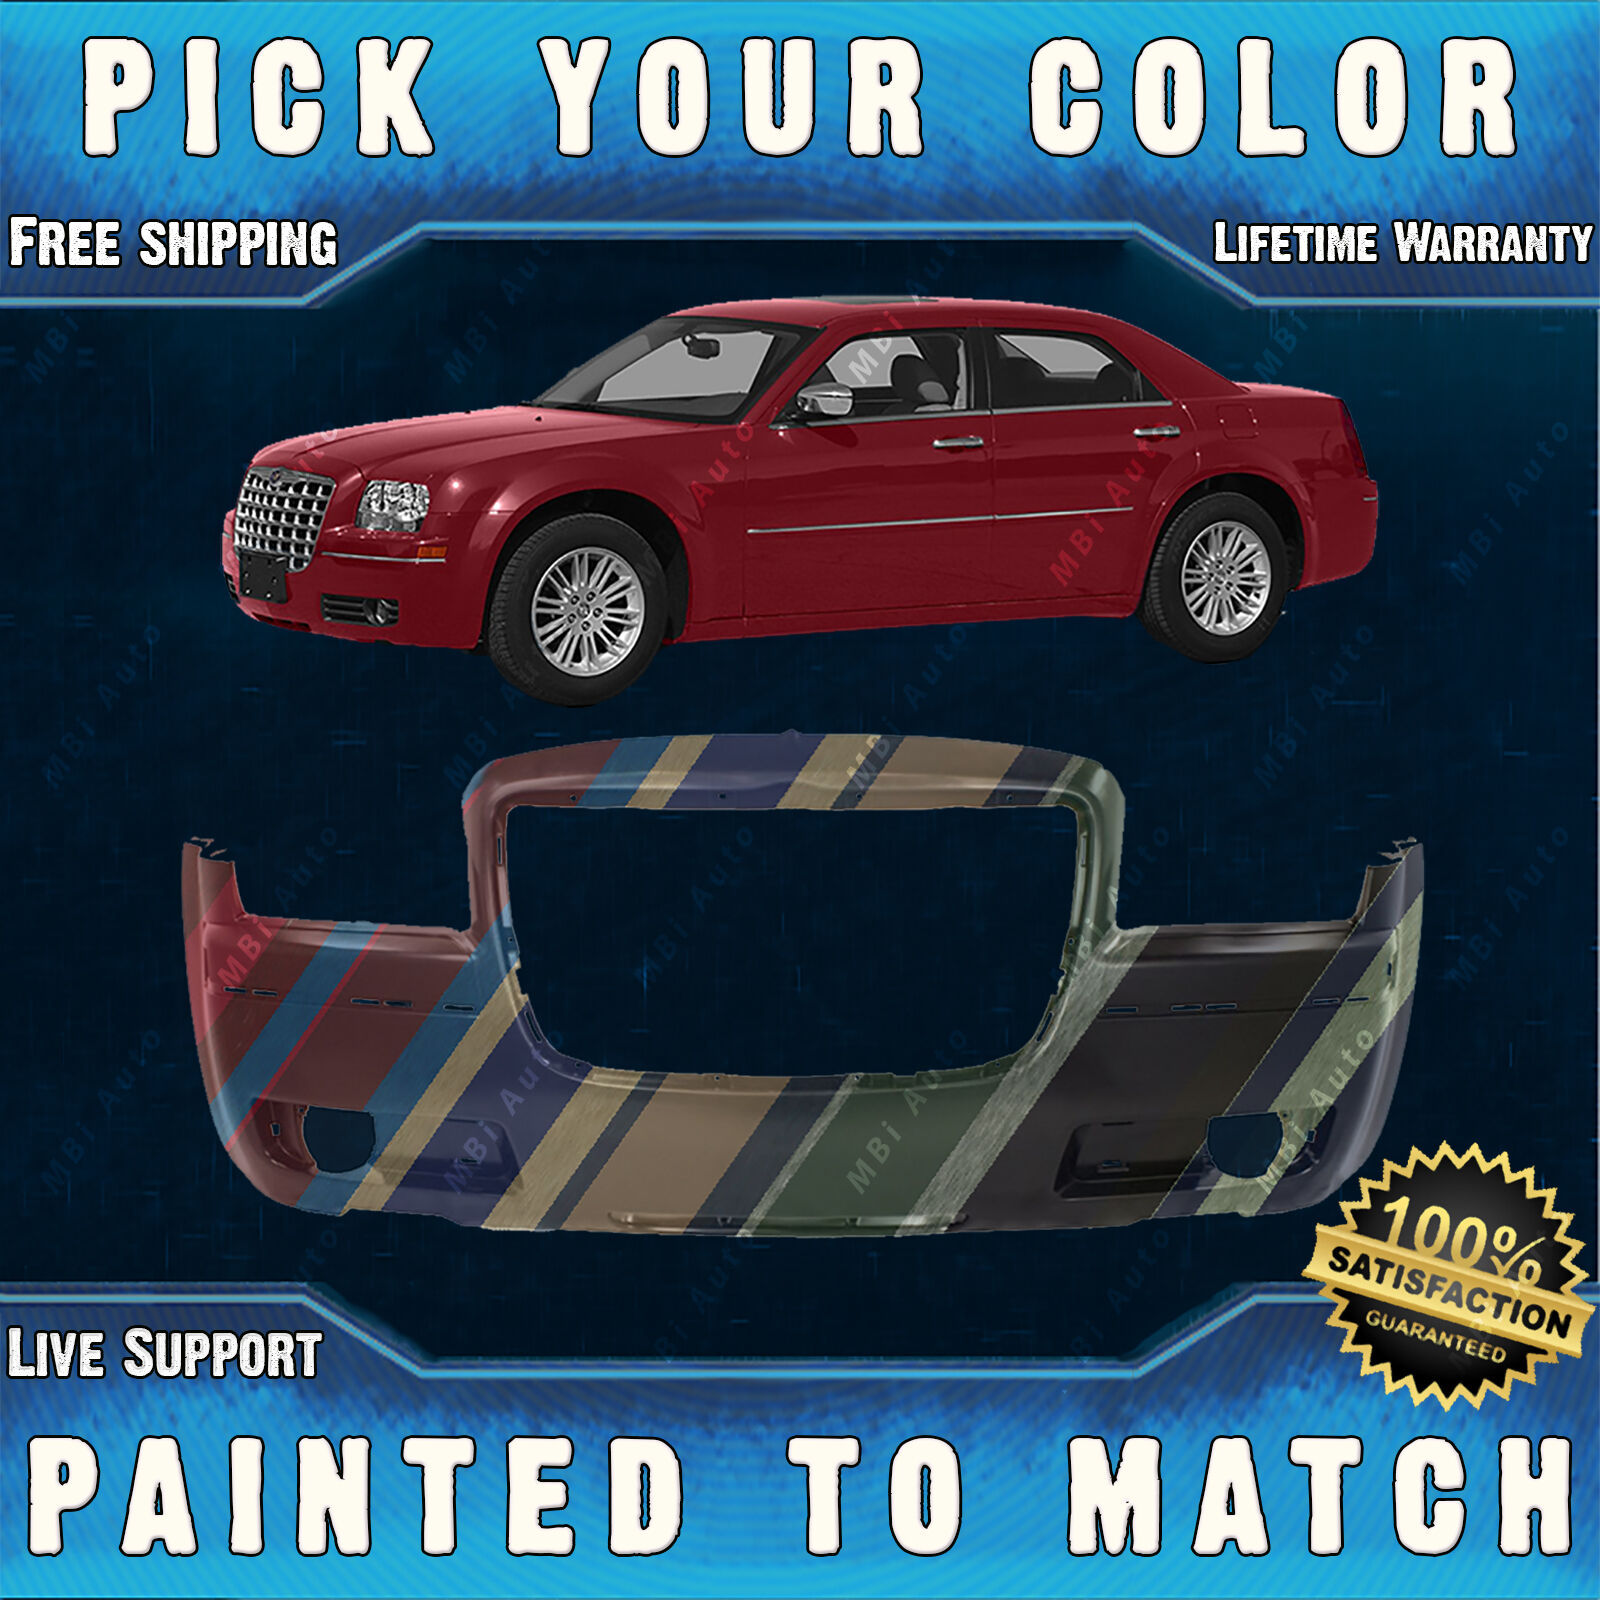 NEW Painted To Match - Front Bumper Cover for 2005-2010 Chrysler 300 w/ Fog 3.5L